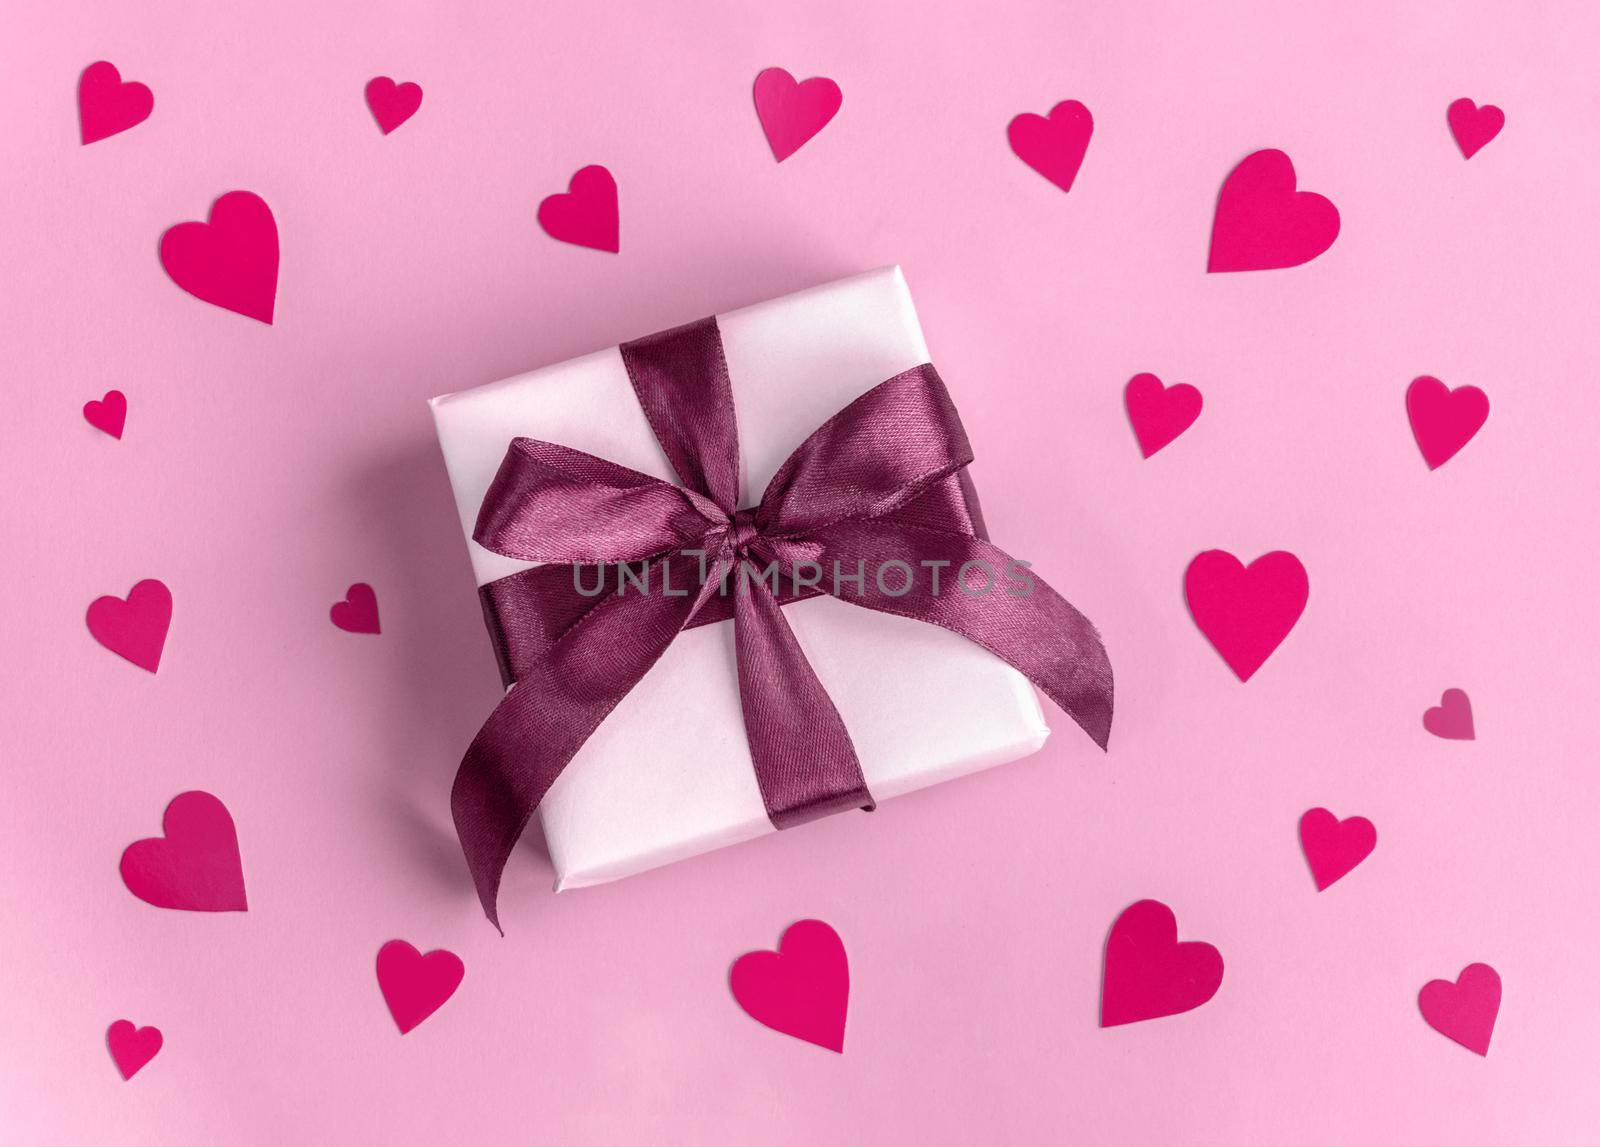 Gift in white wrapping paper on pink background with red purple hearts. St. Valentines Day, love, tenderness, friendship, and care concept. Cozy, festive, romantic wallpaper